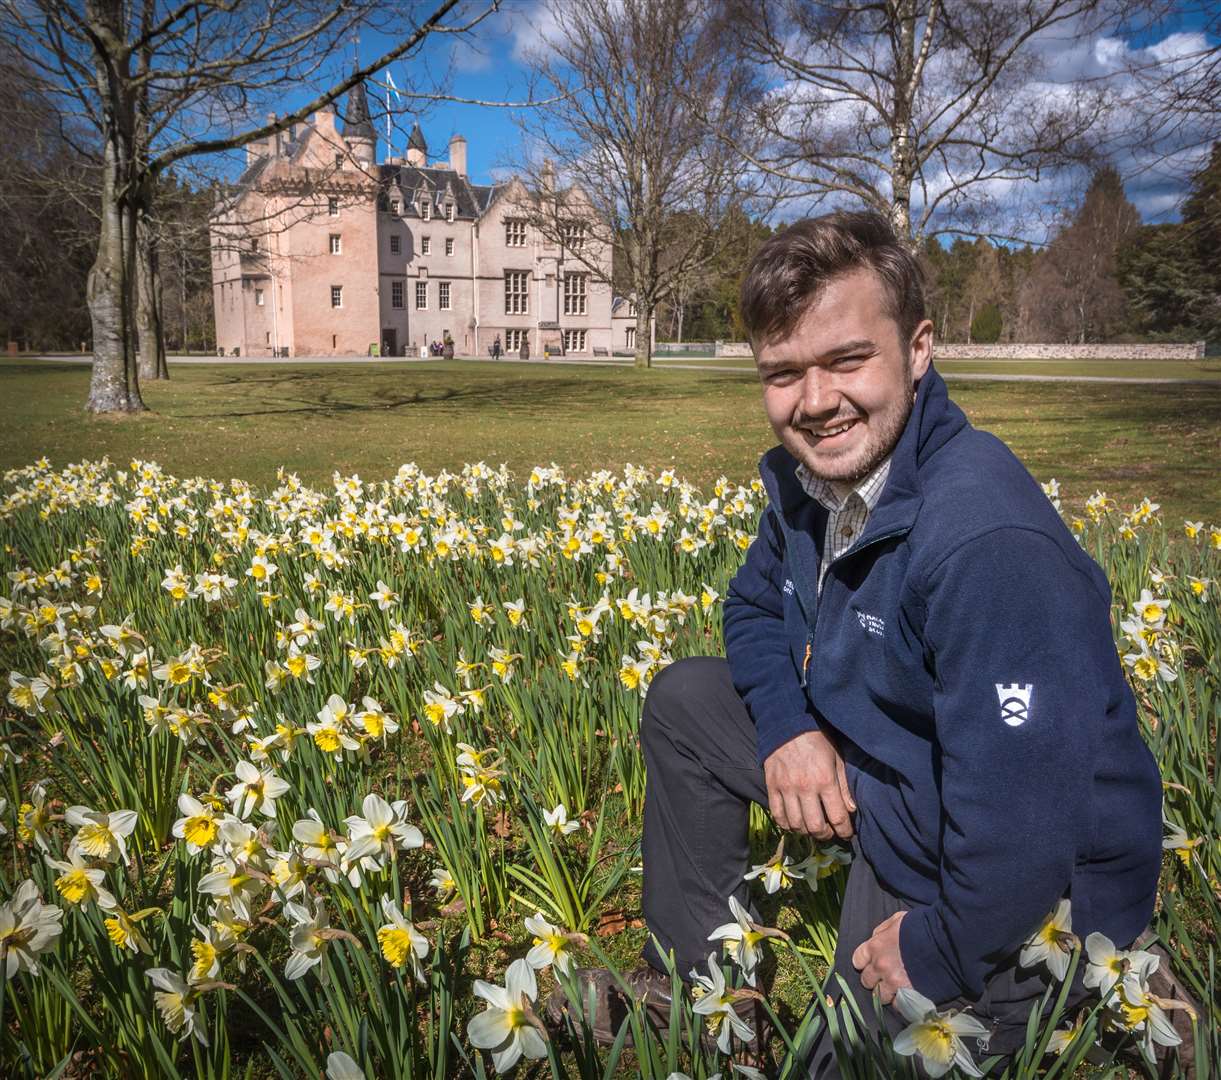 Ed Walling and some of Brodie Castle's famous daffodils.